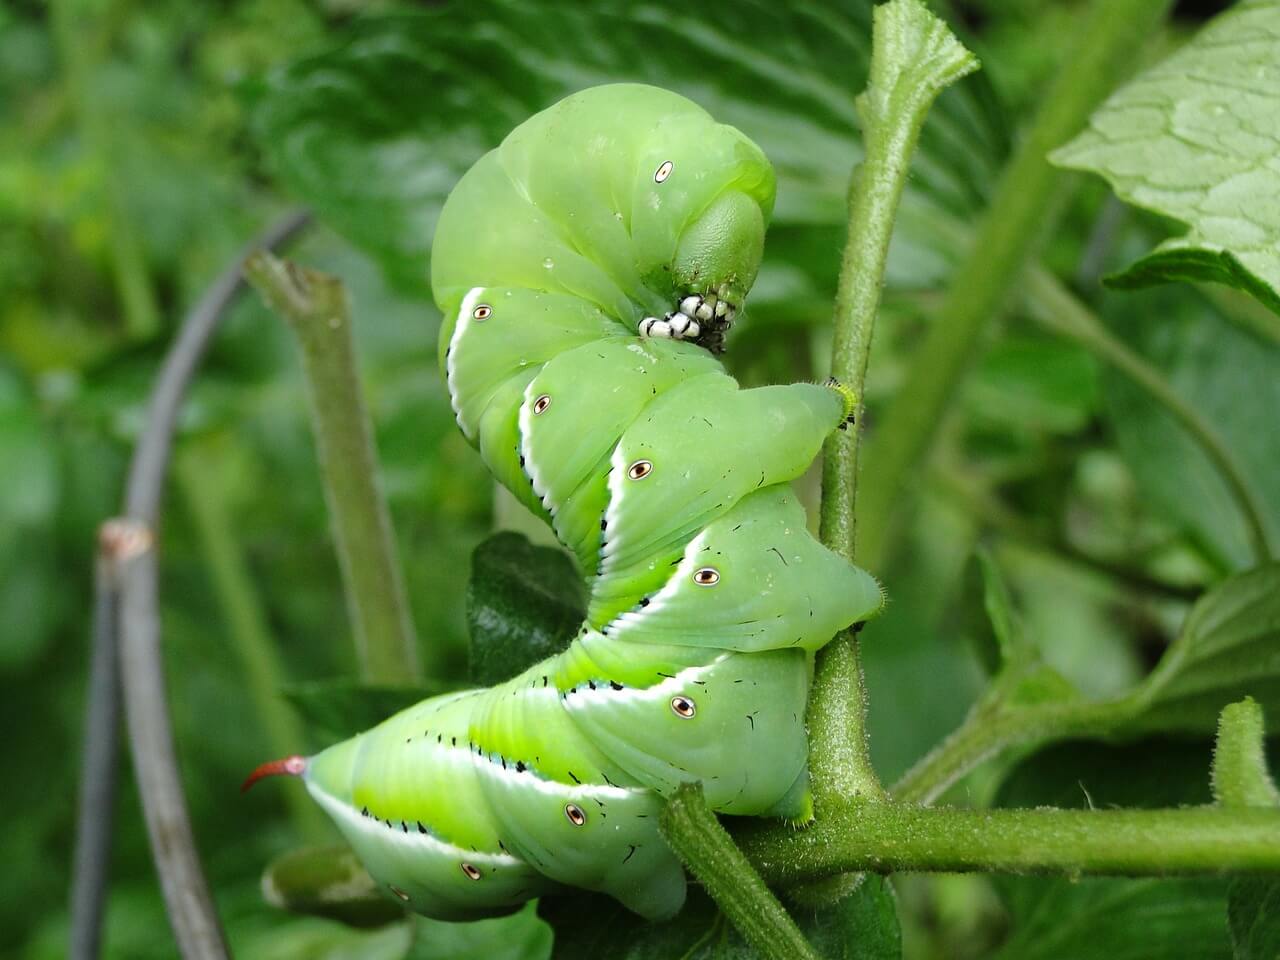 How do you get rid of tomato worms naturally